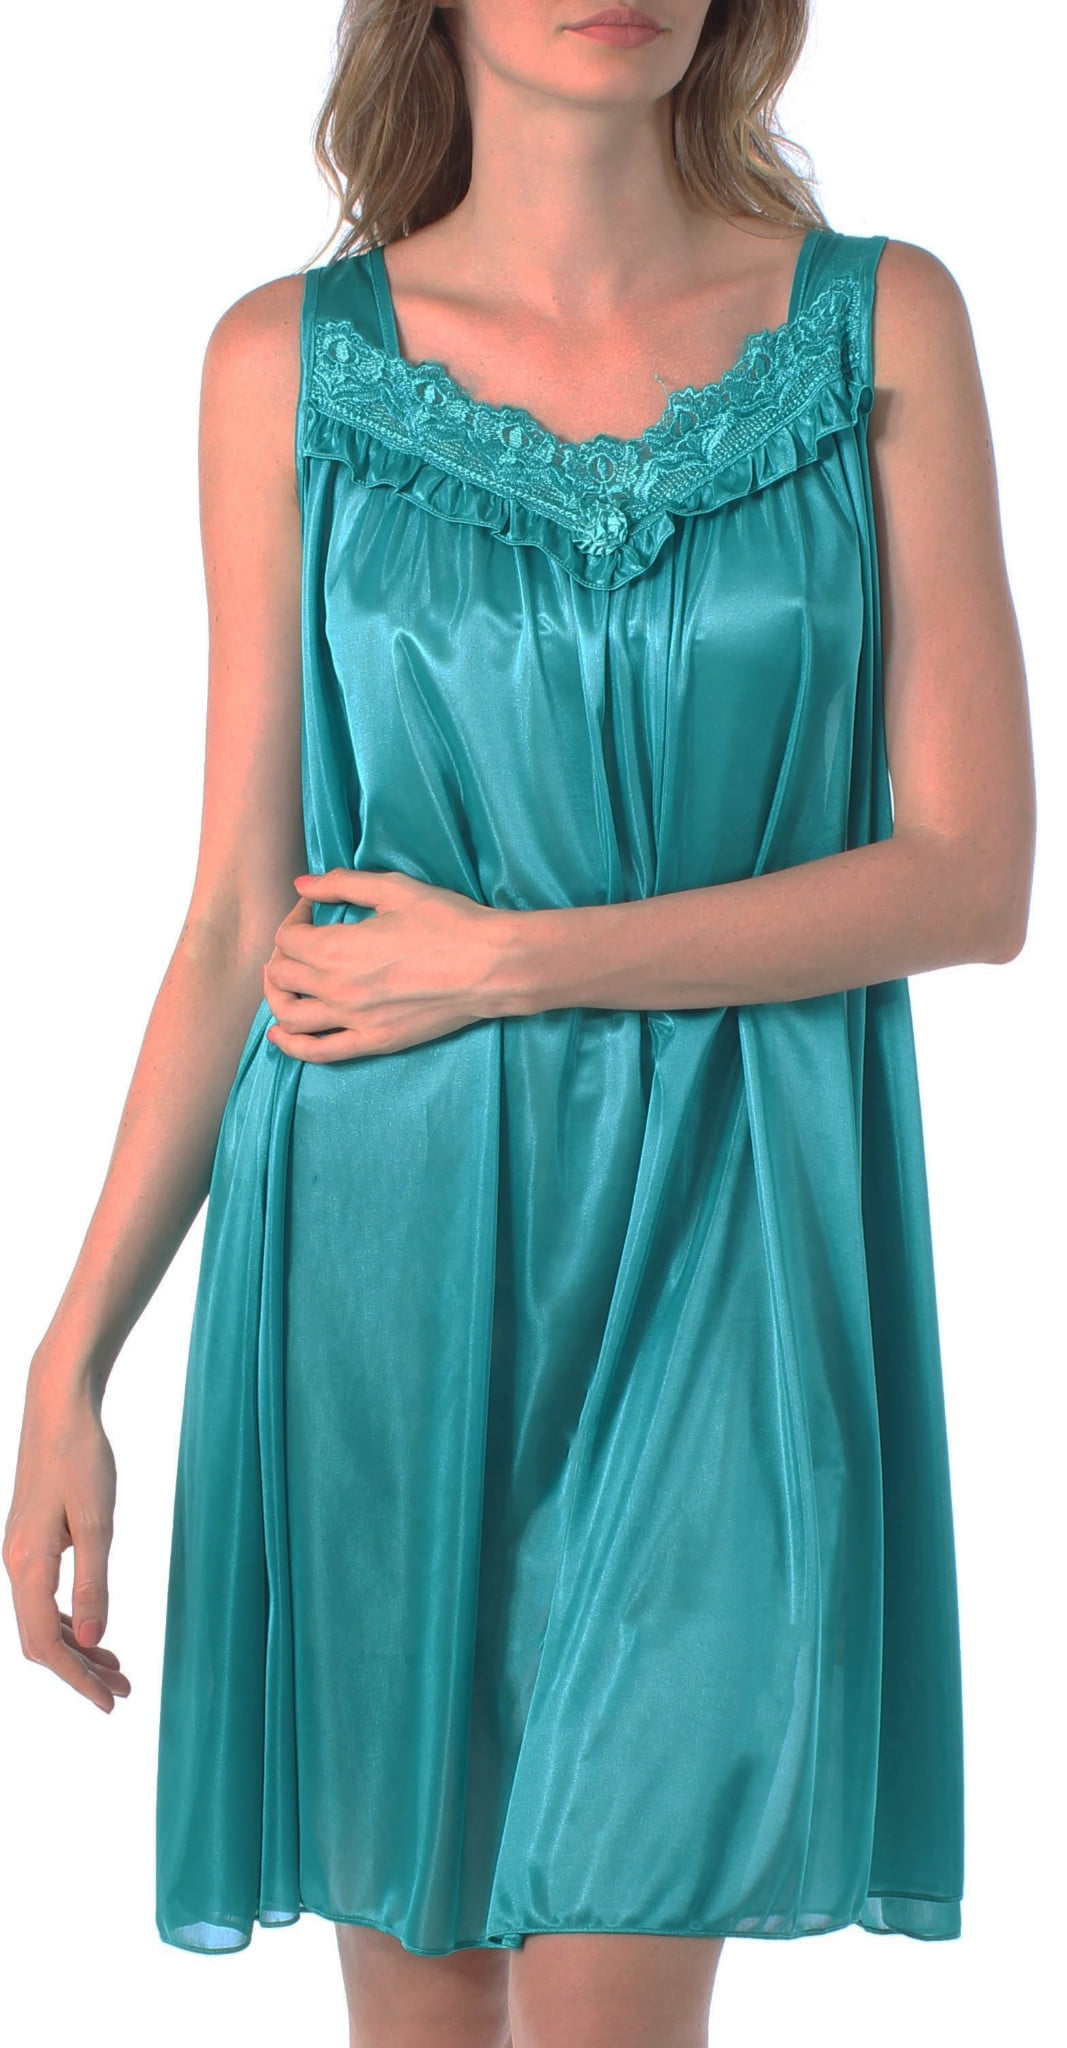 Venice Women's Silky Looking Embroidered Nightgown 42N Medium Teal ...